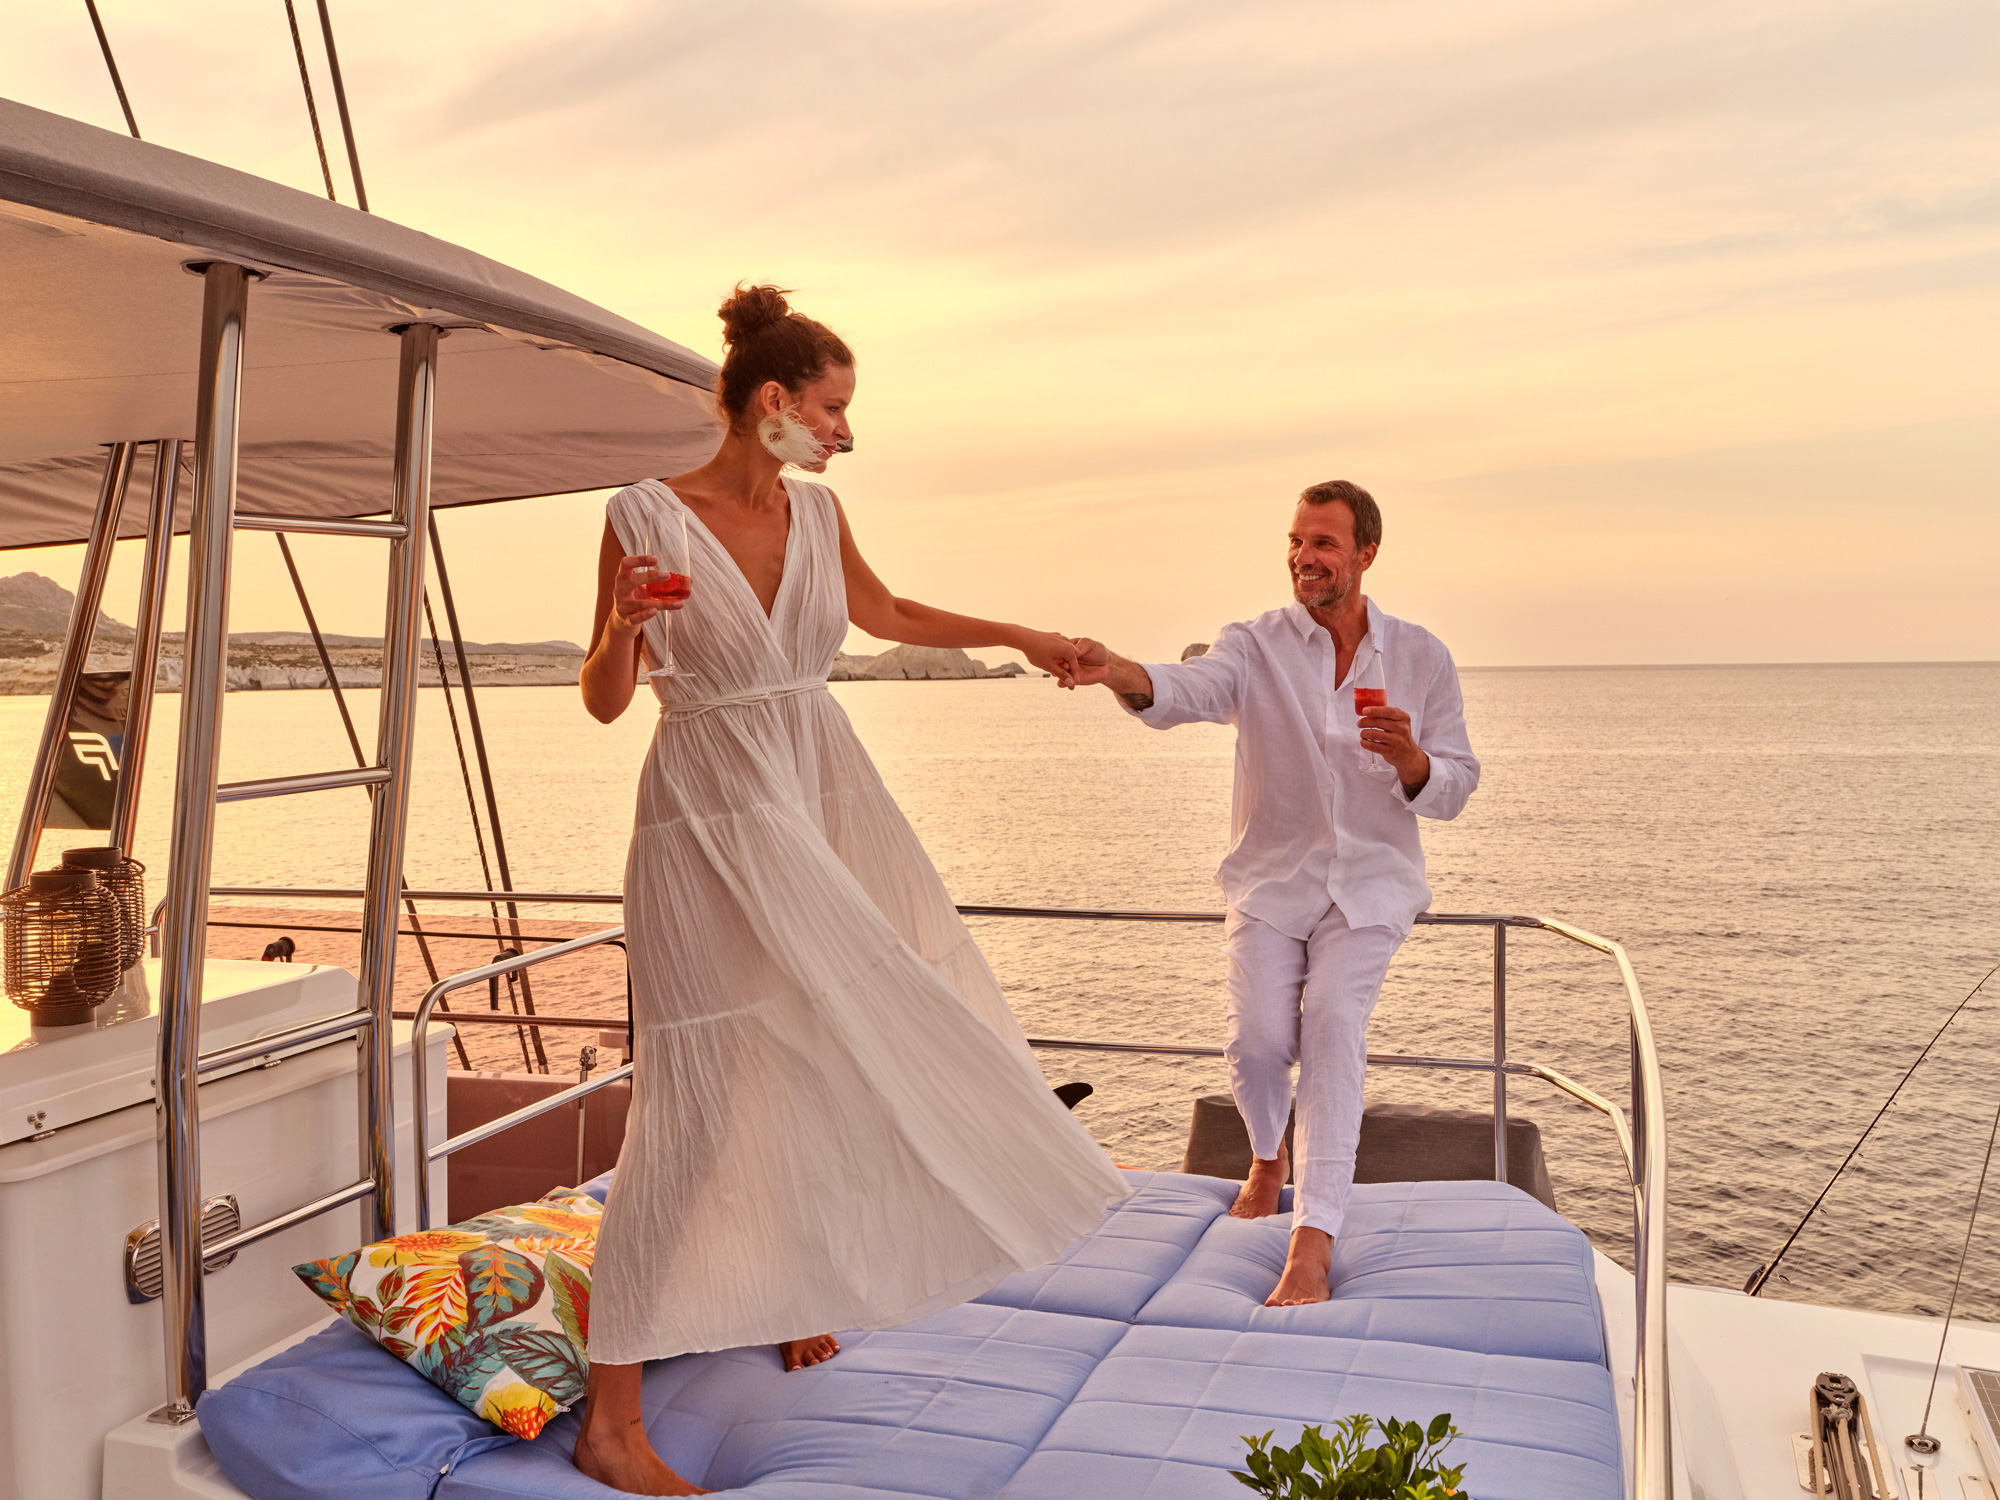 Romantic Moments Aboard A Yacht